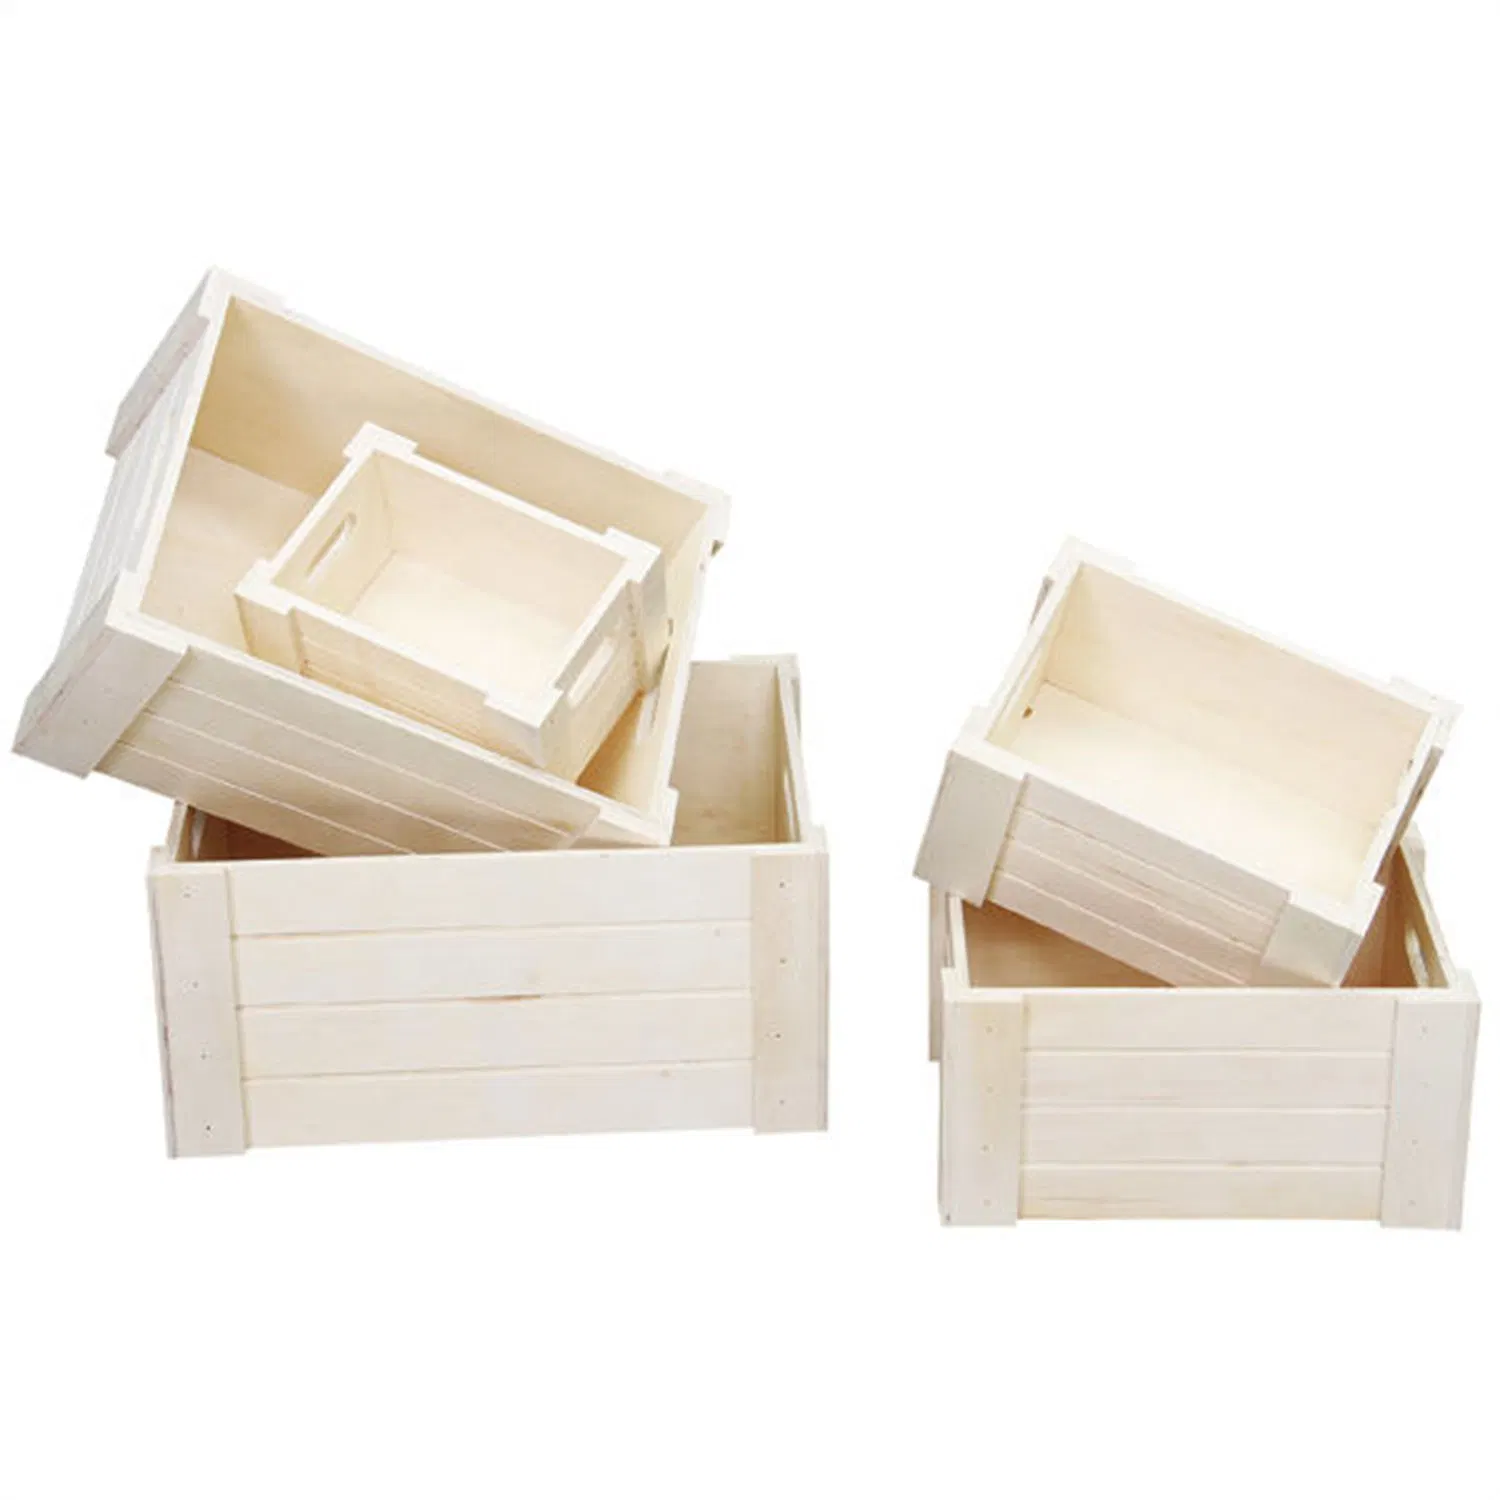 Handmade Unfinished Unpainted Wooden Box with Hinged Lid for Crafts DIY Storage Jewelry Plain Pine Box